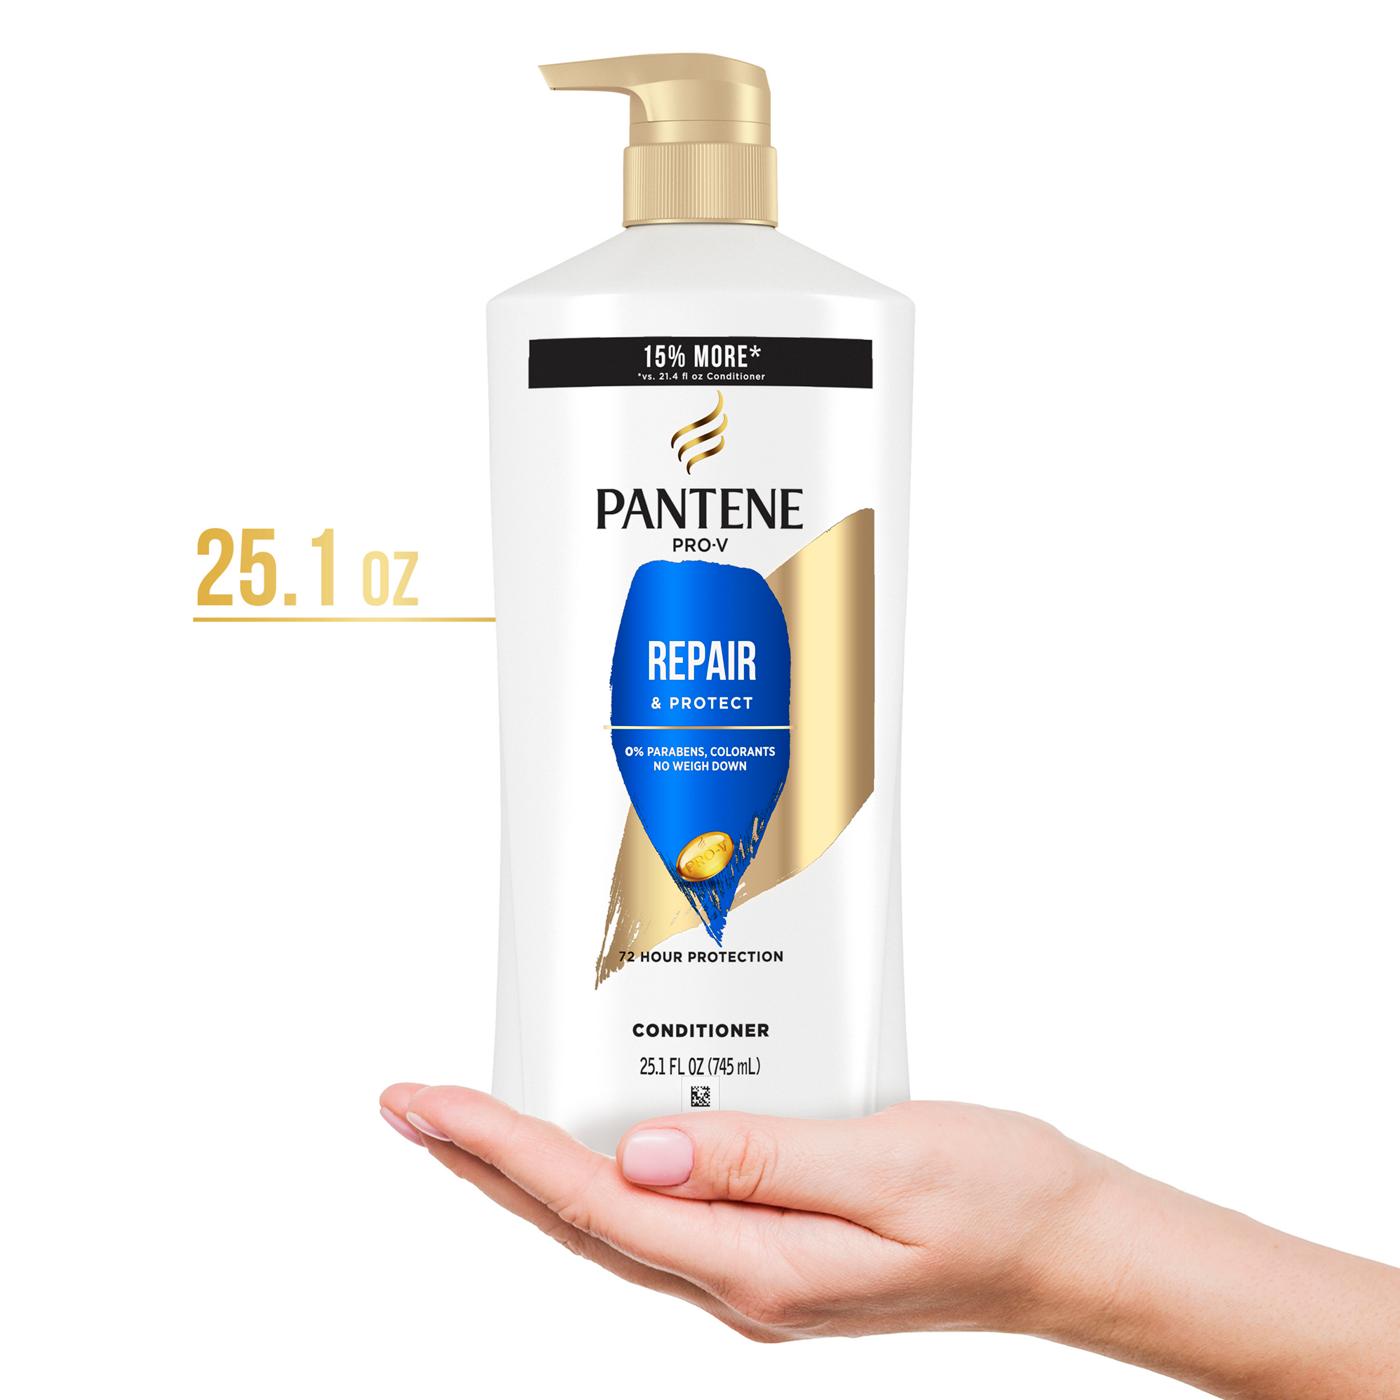 Pantene PRO-V Repair & Protect Conditioner; image 3 of 9